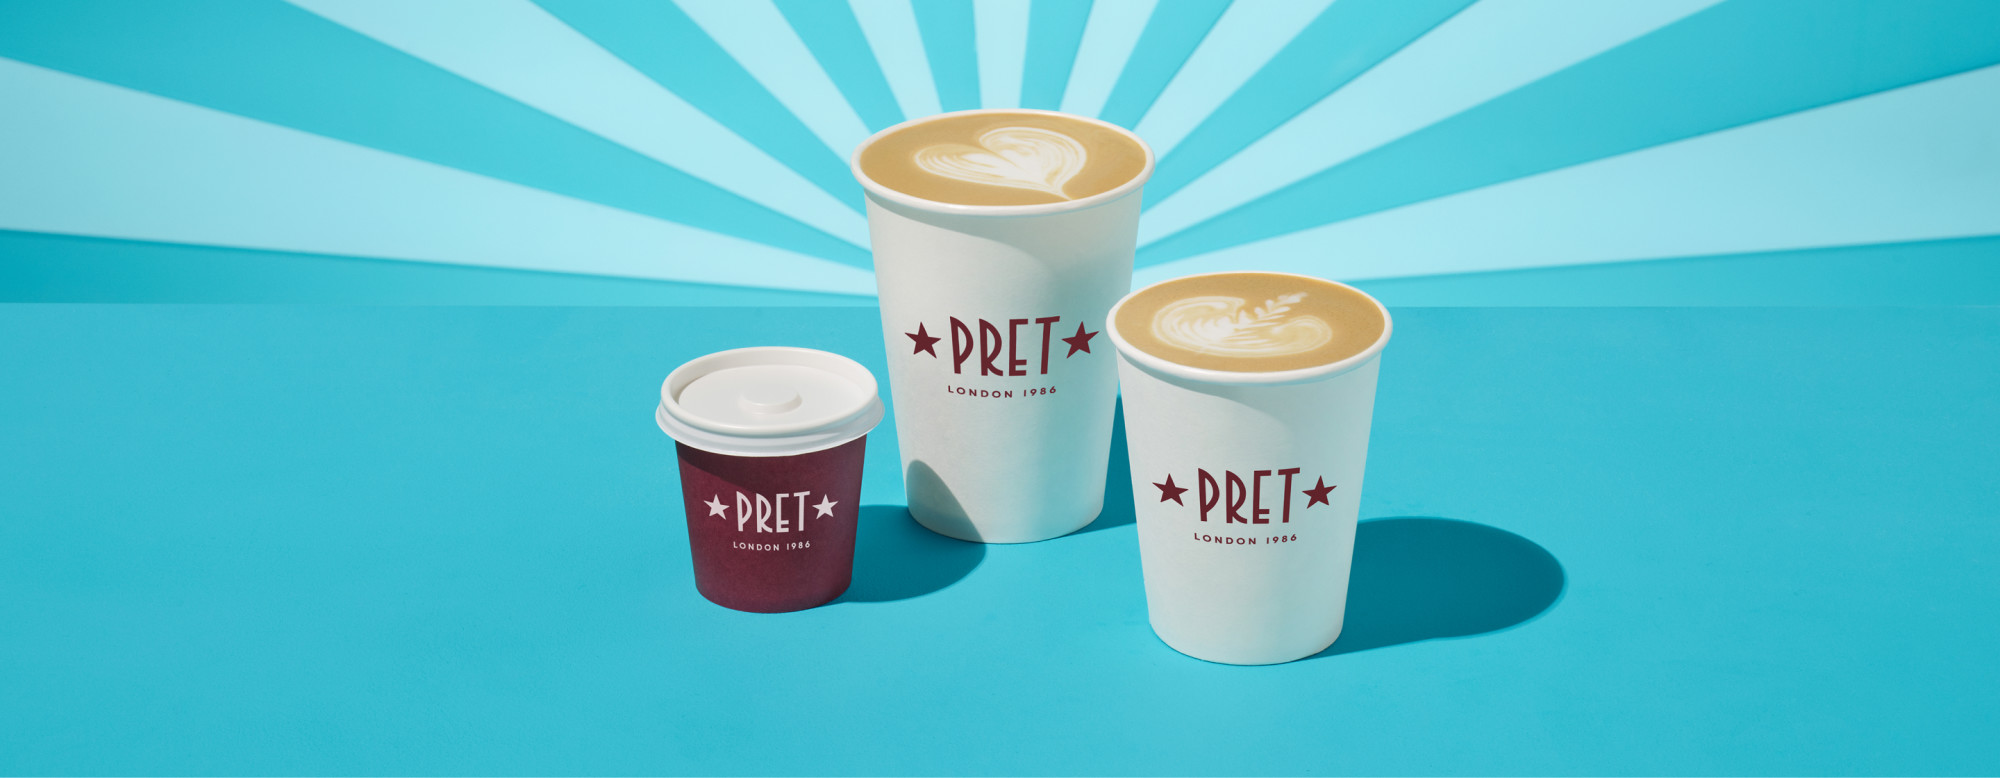 Say hello to your new Pret Coffee Subscription